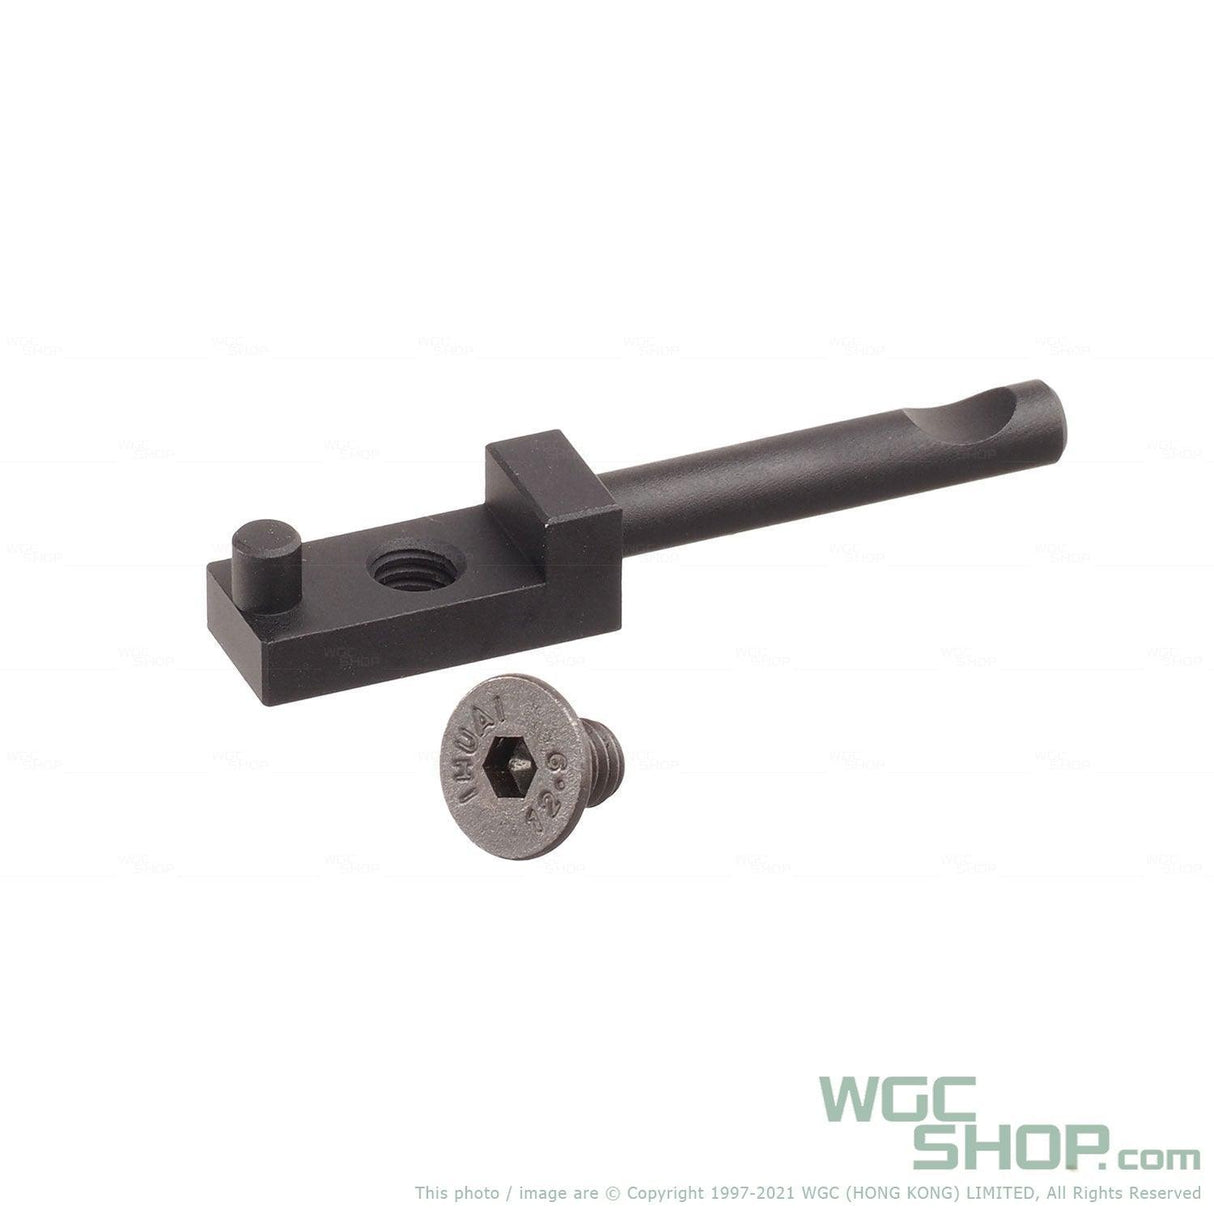 HERO ARMS M-Style CNC Rail for MPX GBB Airsoft - WGC Shop